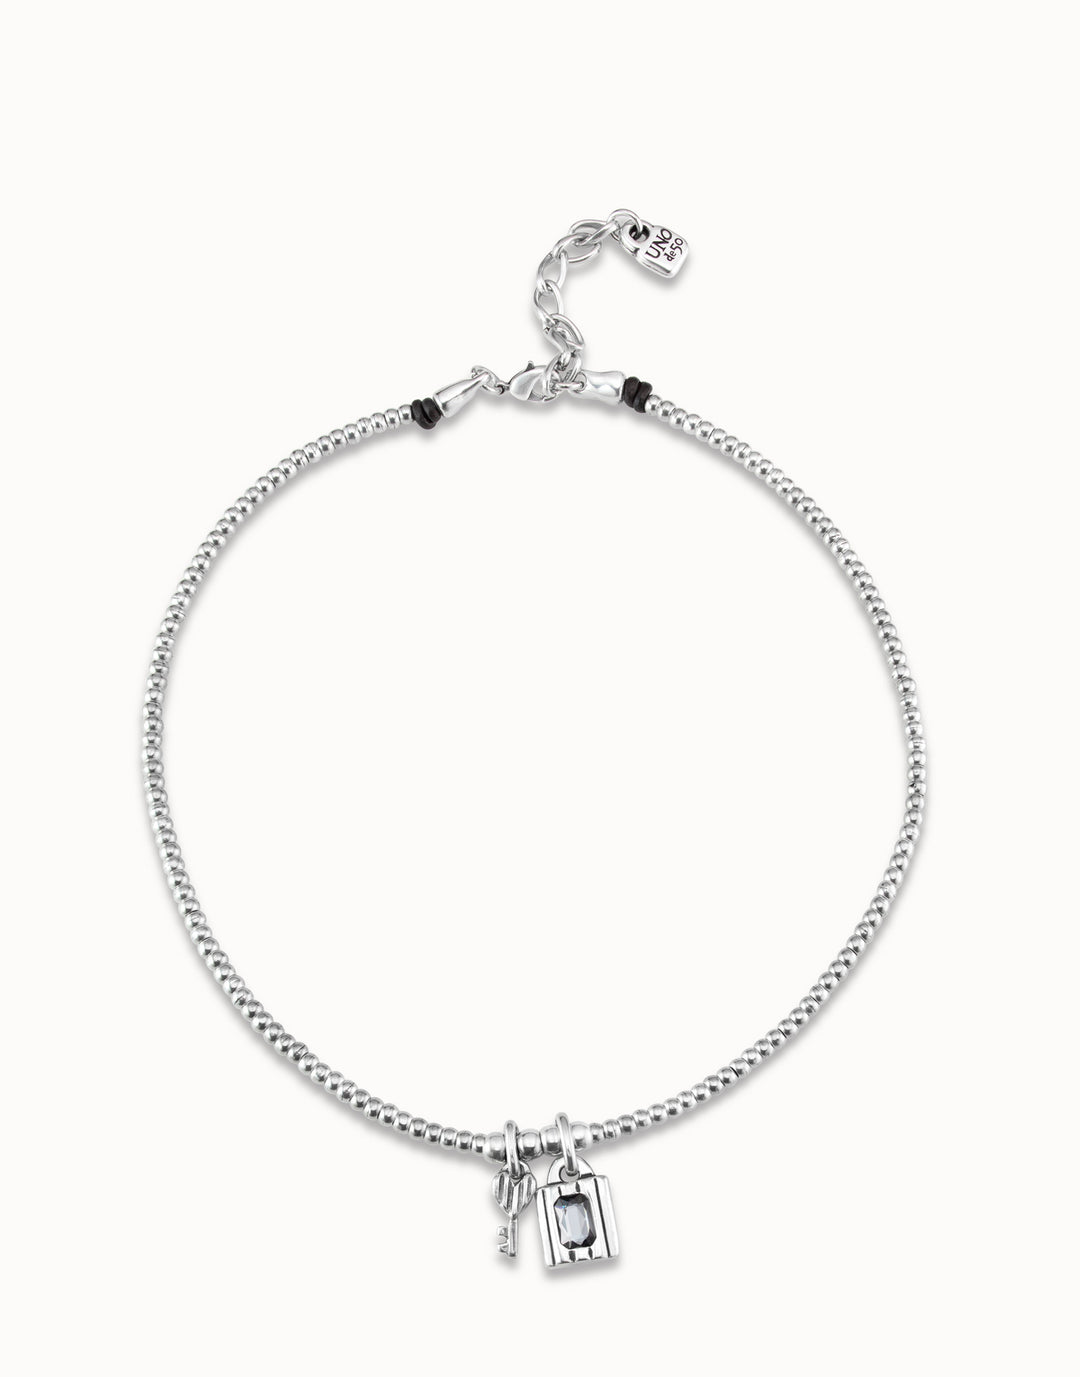 THE GUARDIAN NECKLACE SILVER - Kingfisher Road - Online Boutique